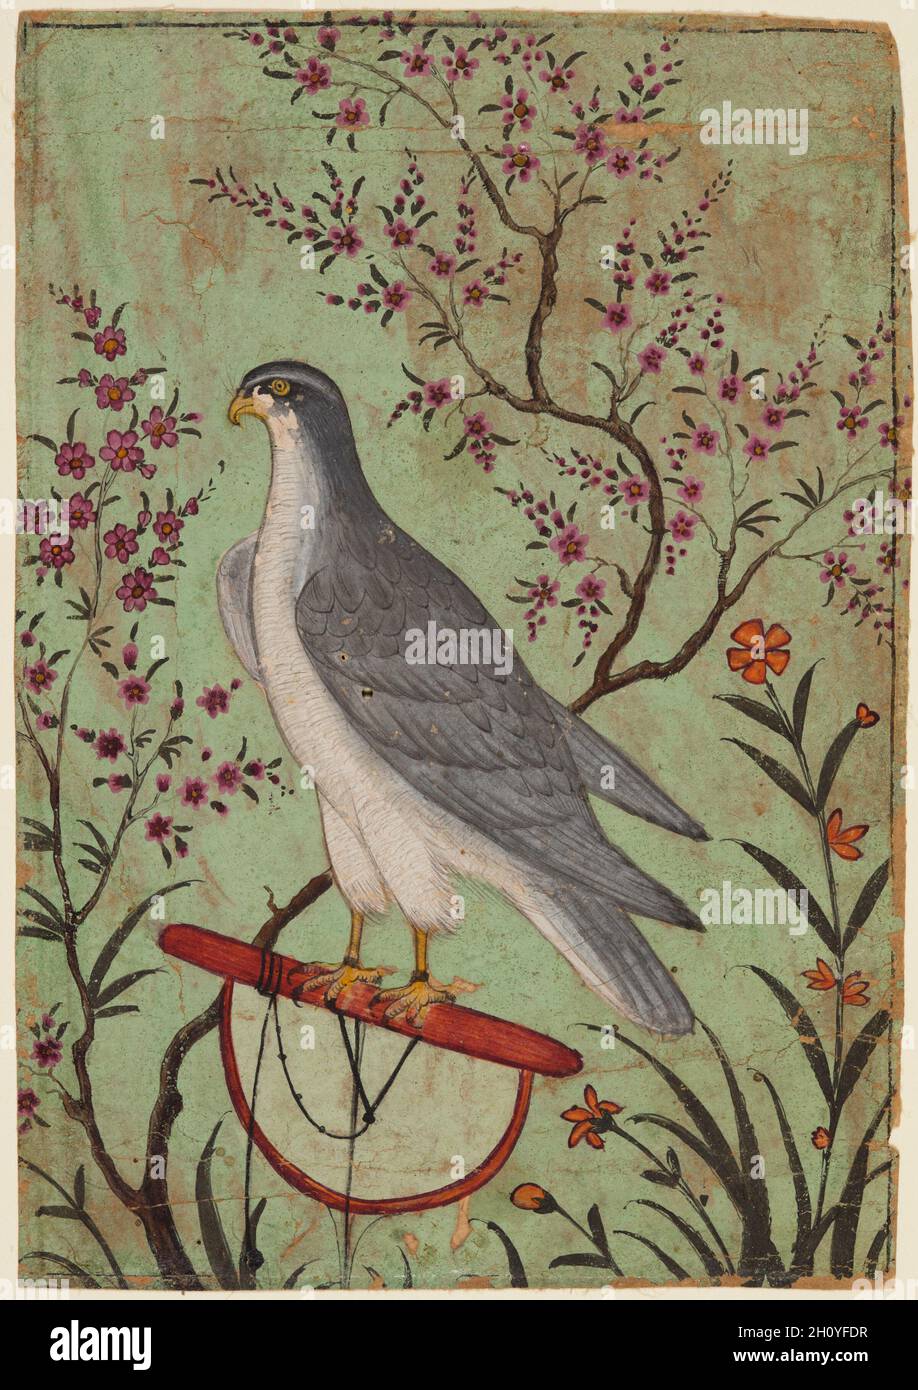 Falcon on a Perch, c. 1610. Northwestern India, Rajasthan, Rajput Kingdom of Amber. Gum tempera on paper; miniature: 12.8 x 8.9 cm (5 1/16 x 3 1/2 in.).  Falcons were prized participants in royal hunting expeditions, and this painting may be a portrait of a favorite bird or a gift from an ally. The bird faces left, and the talons are tied to the perch with a black string. The light green background, flowering trees, and plants provide dynamism to the composition and reveal the artist’s awareness of Persian, Mughal, or Deccani styles of painting. Stock Photo